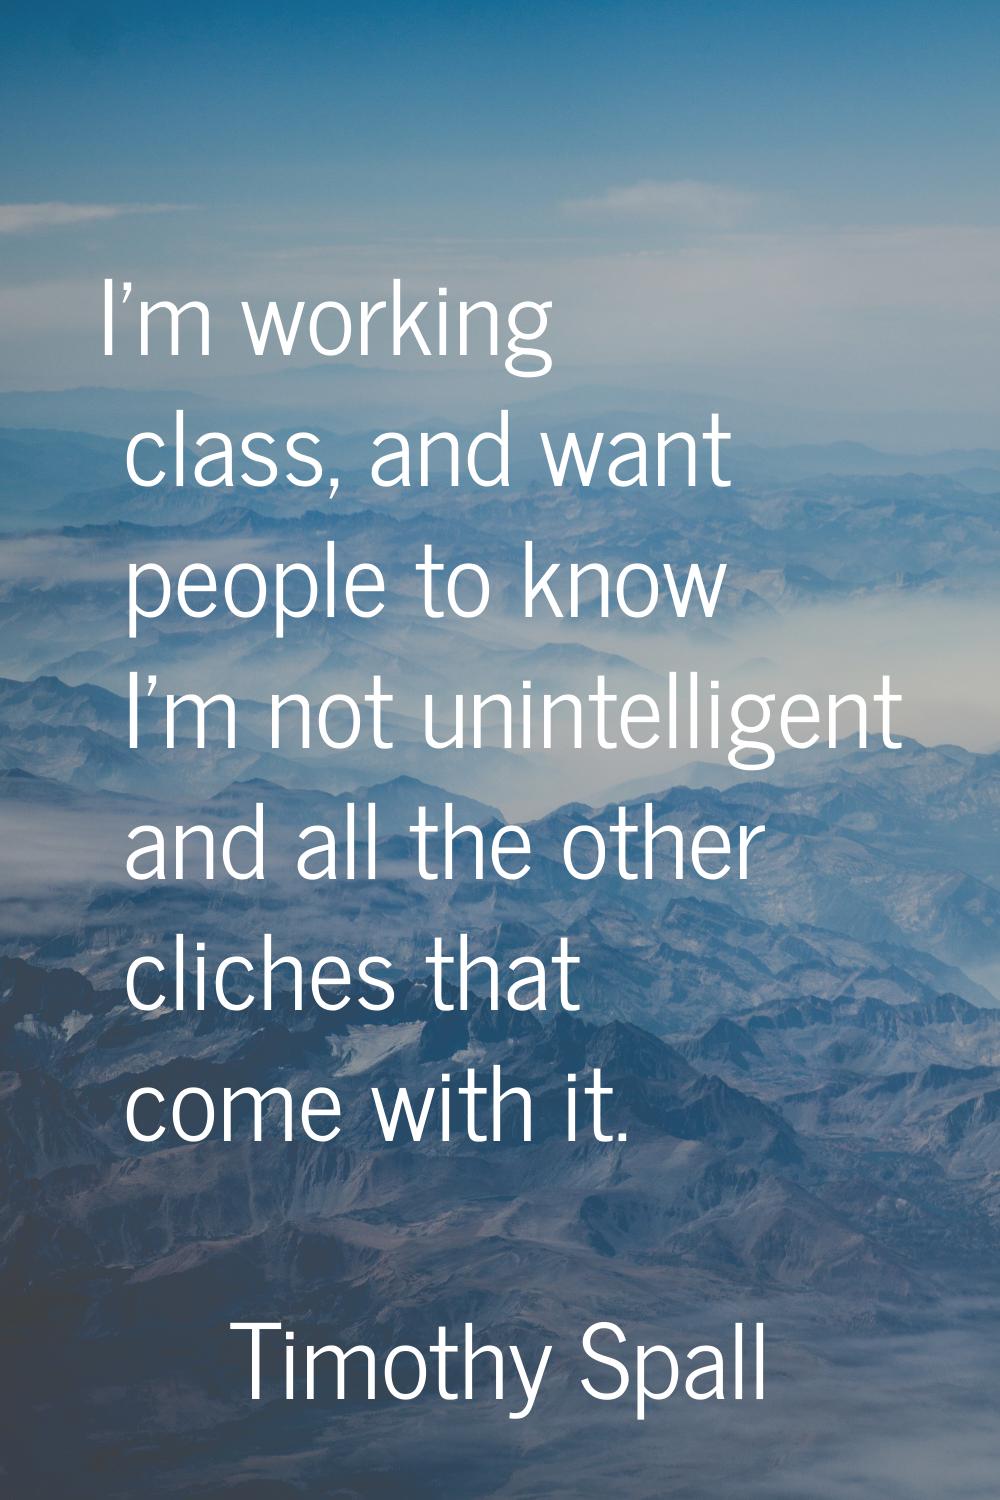 I'm working class, and want people to know I'm not unintelligent and all the other cliches that com